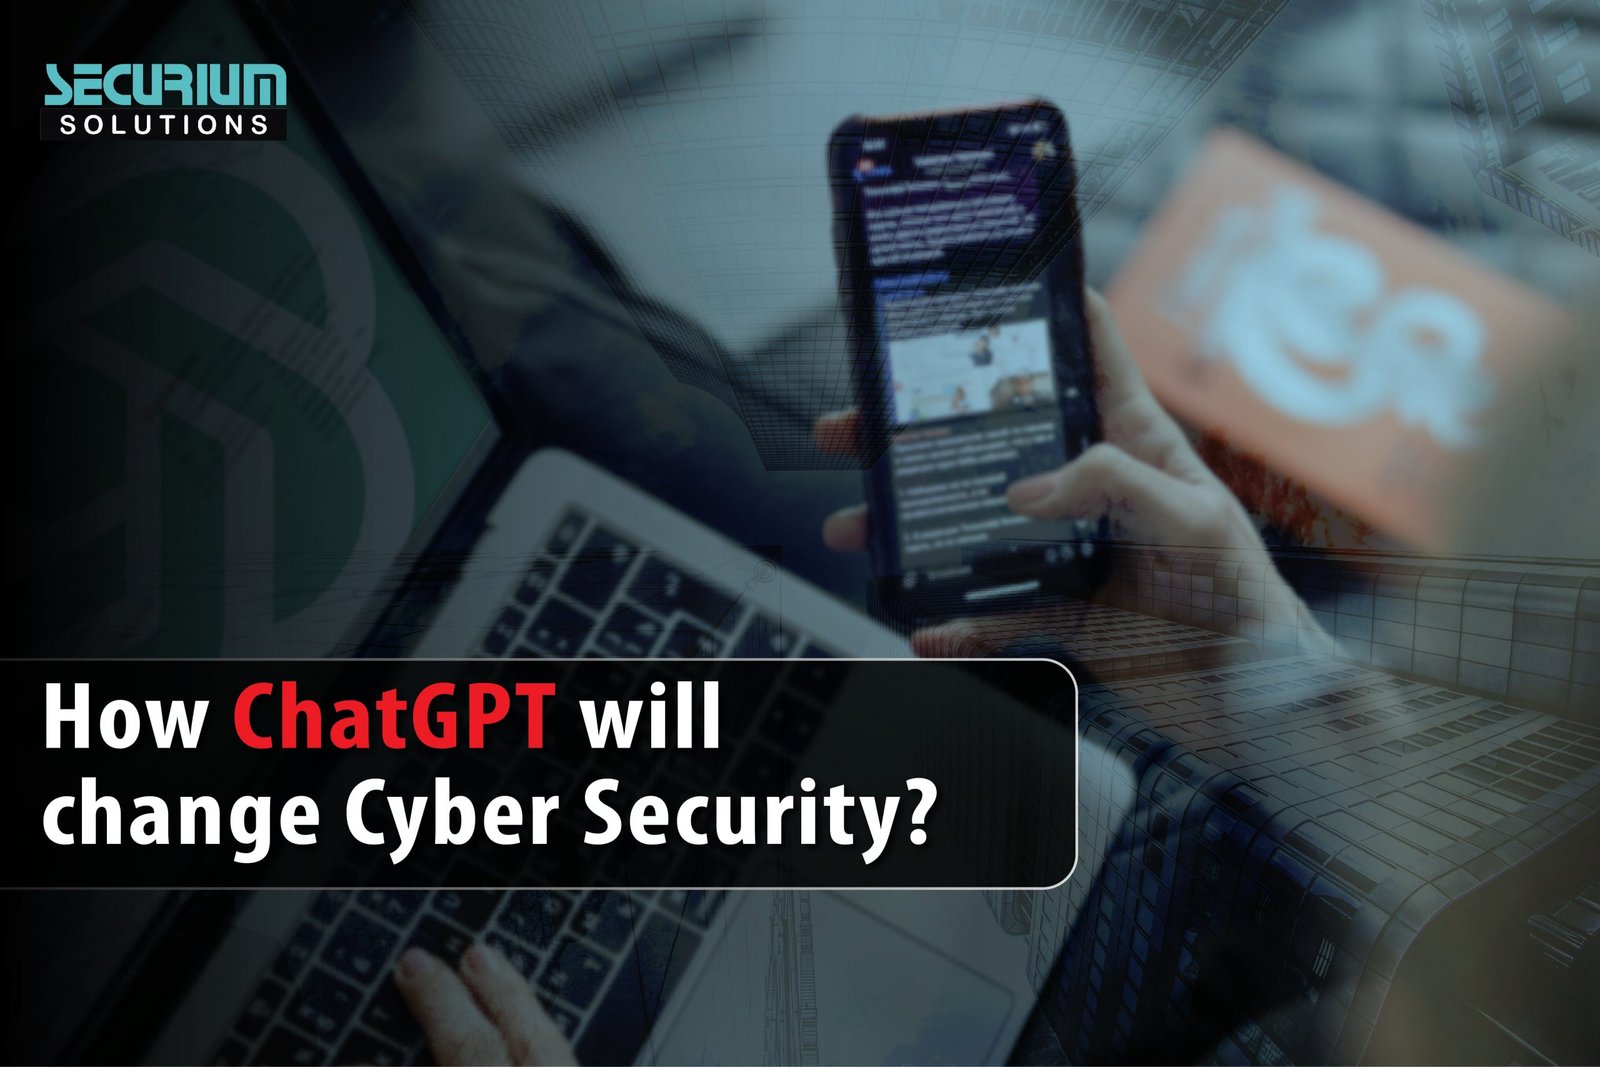 How ChatGPT will change cyber security?